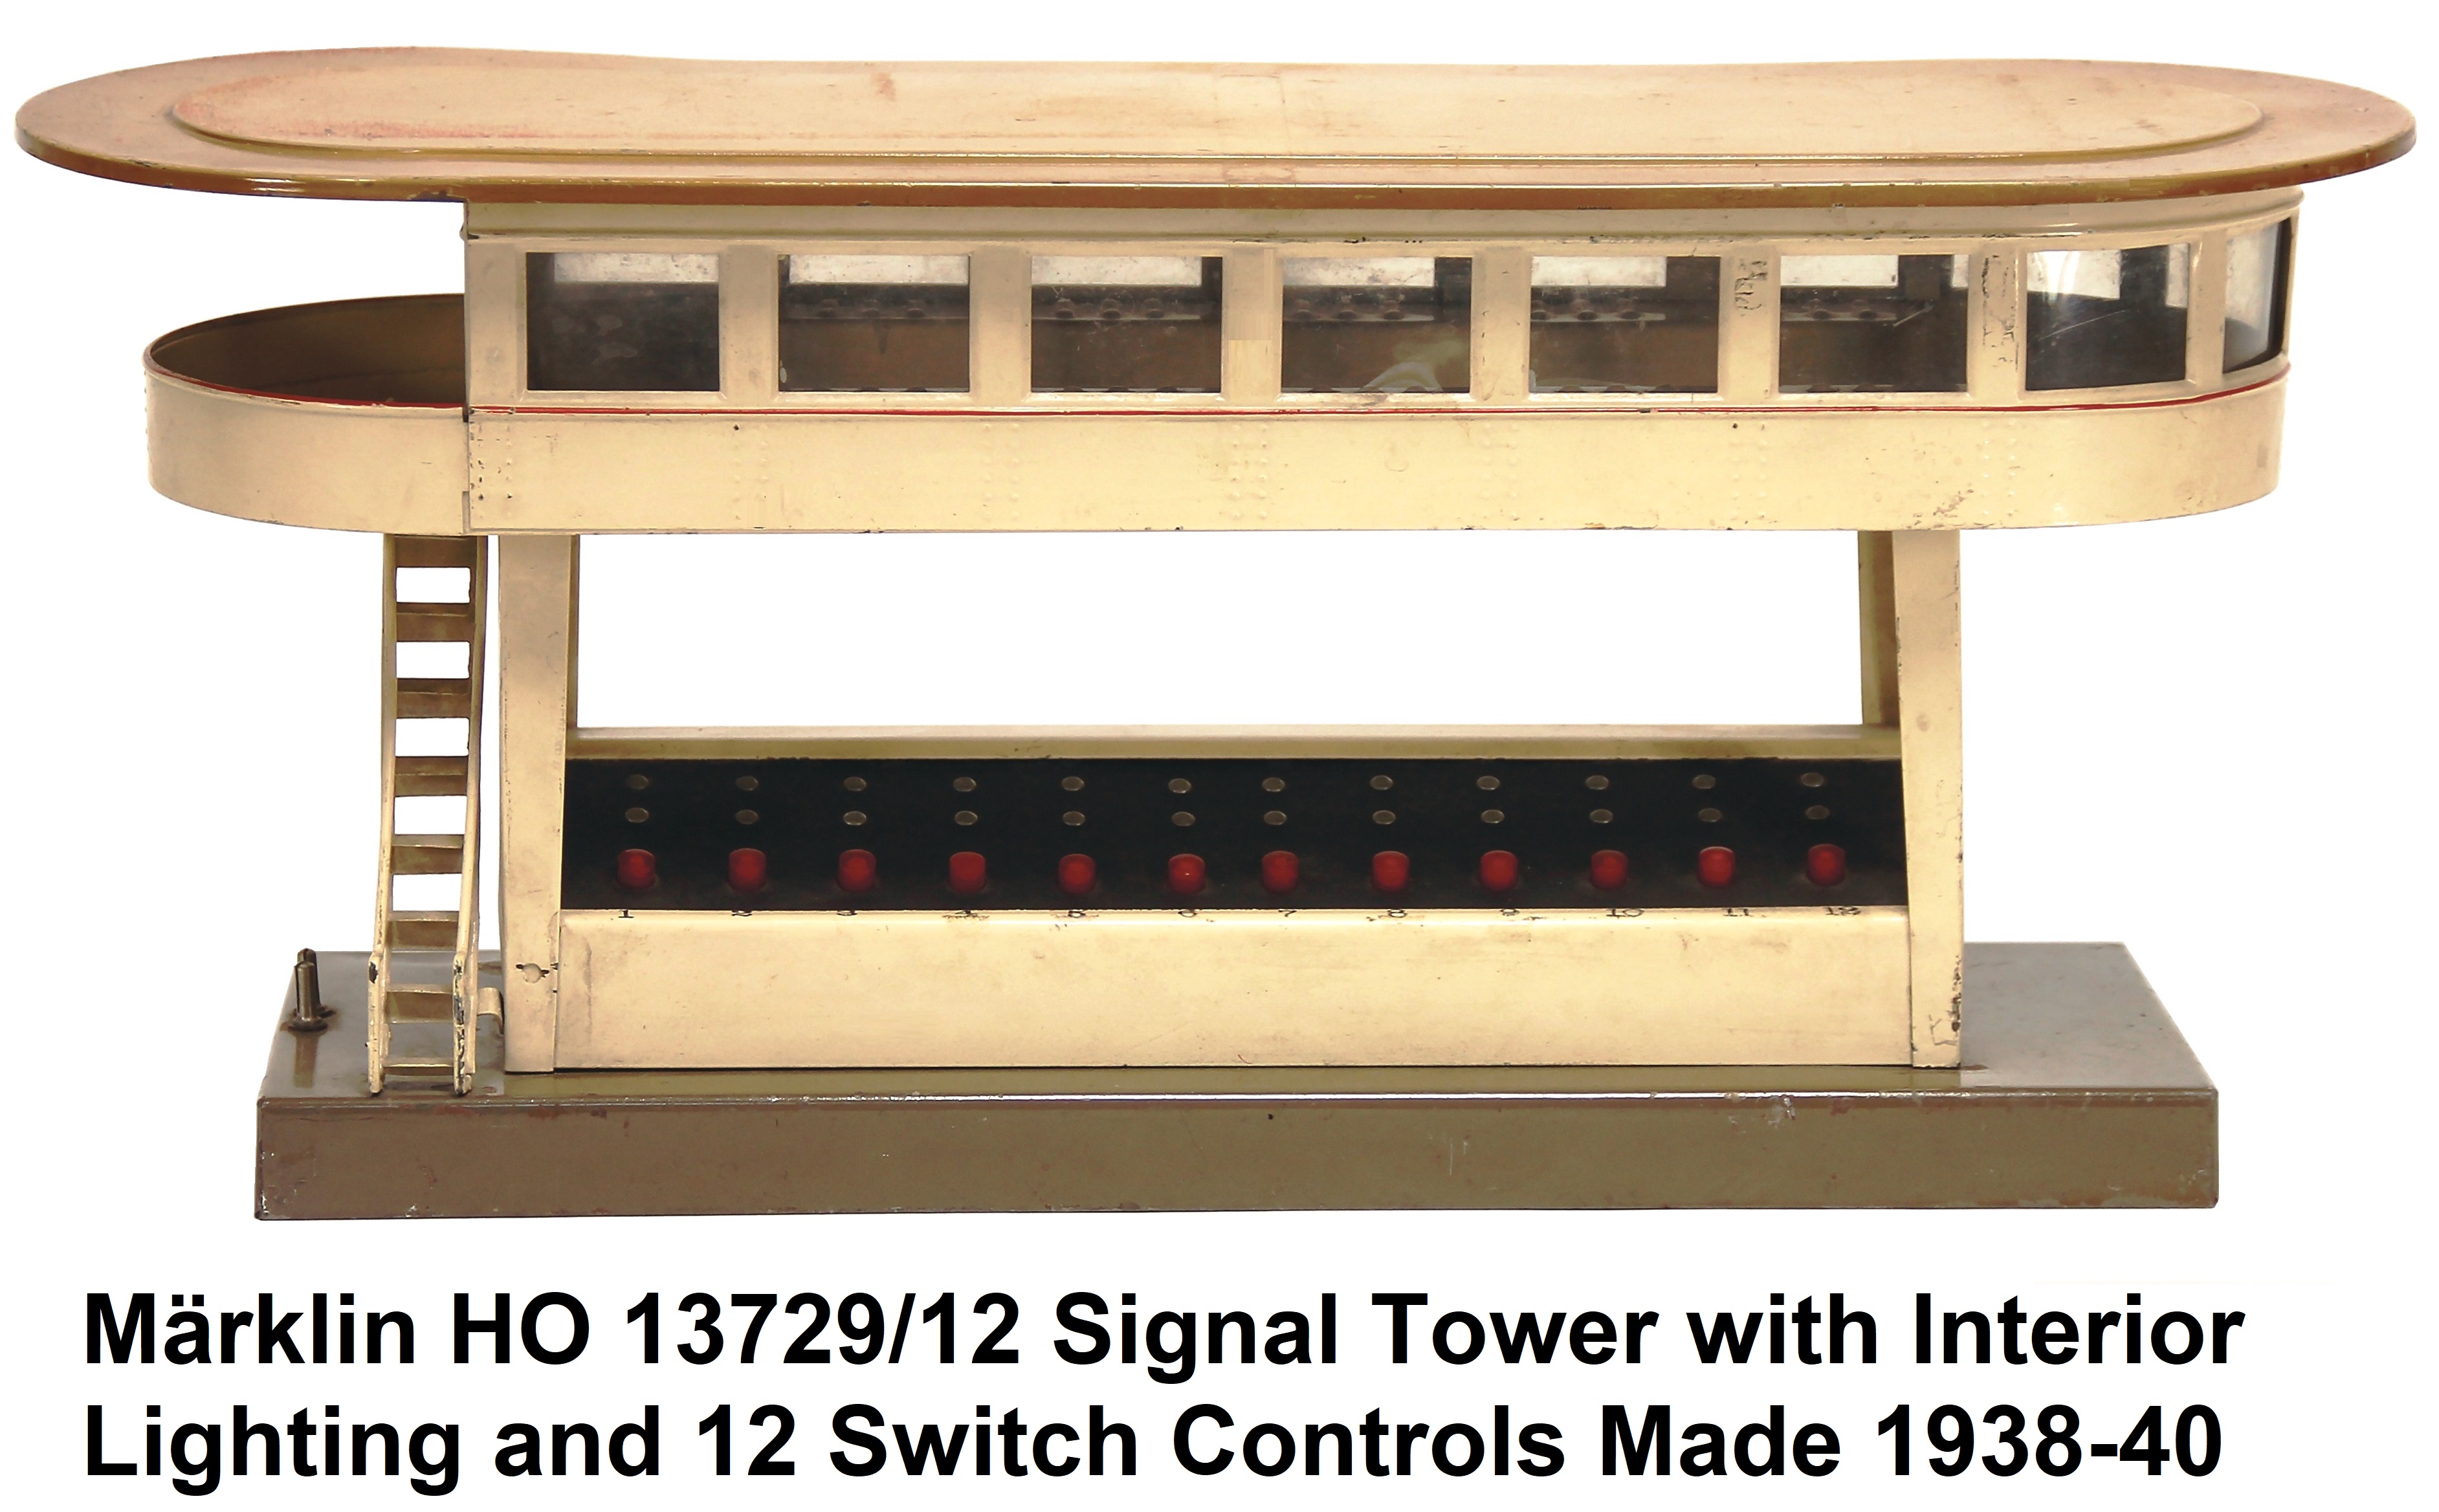 Märklin HO gauge 13729/12 signal tower with interior lighting, 12 switch connections made 1938-40